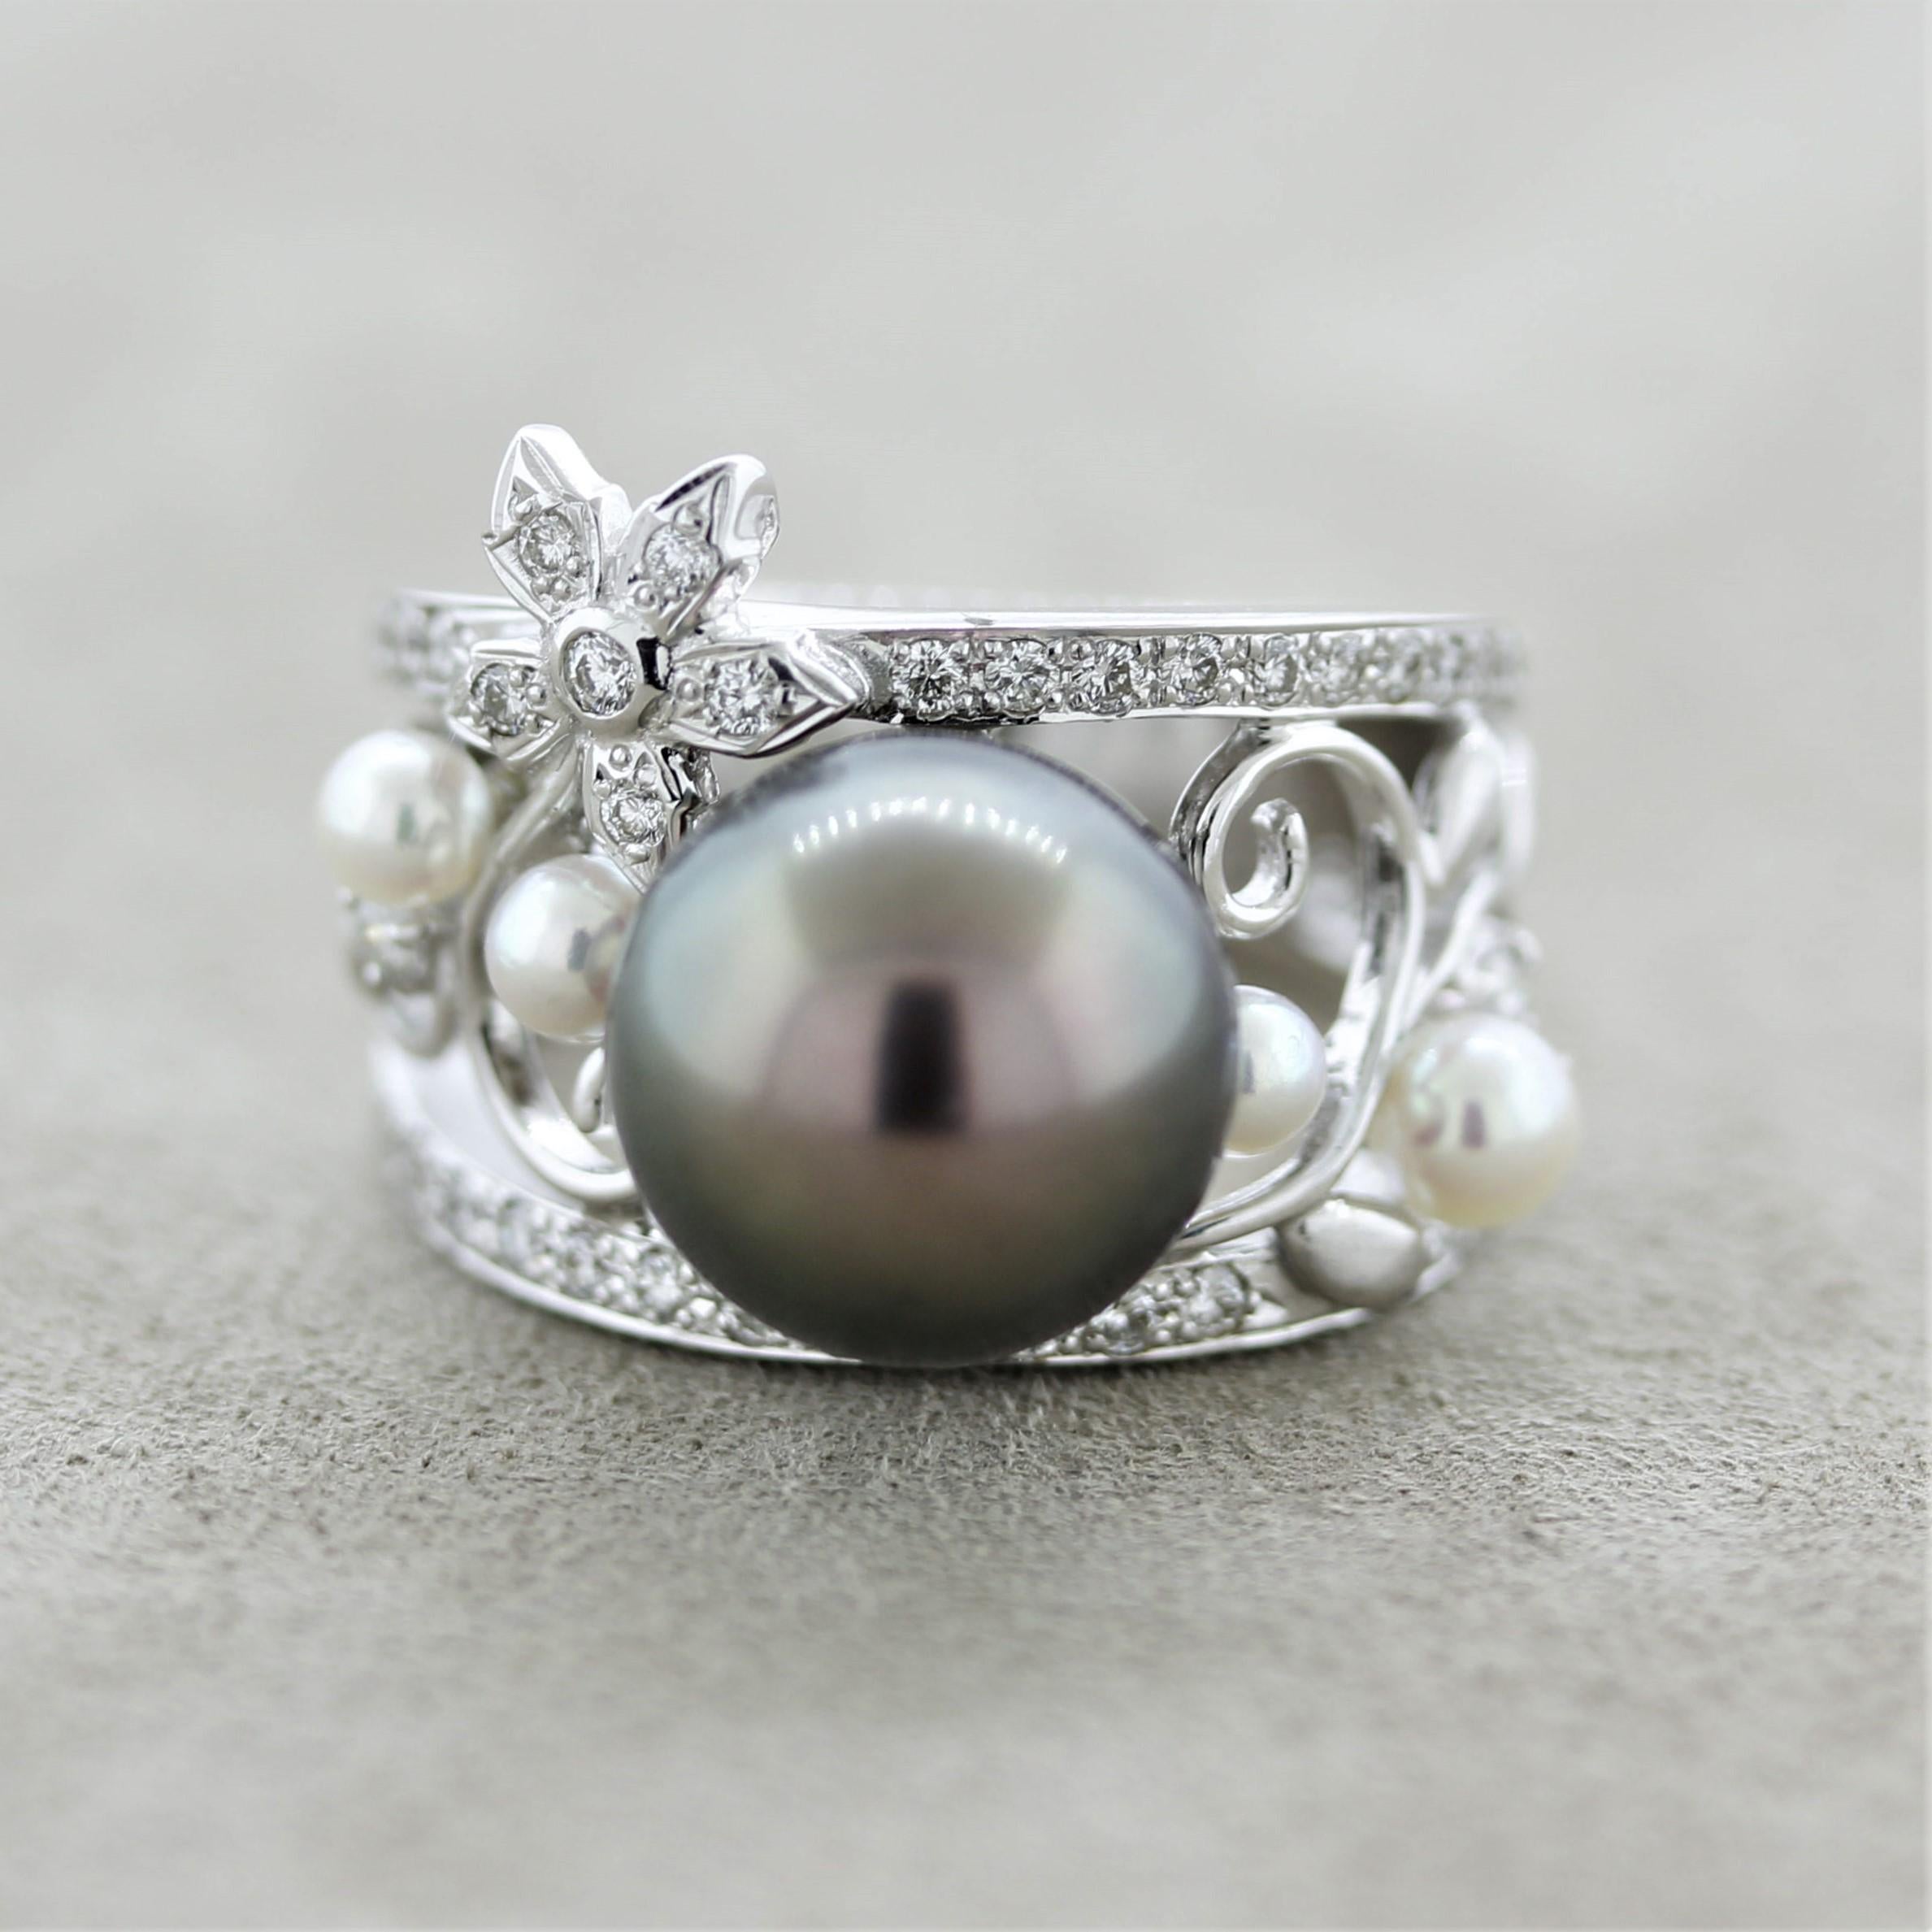 A lovely ring featuring a large and fine quality Tahitian pearl measuring 11.3mm. It has a rich iridescent black pistachio color and is perfectly round with close to no visible blemishes. Adding to that are 4 smaller akoya pearls with very fine